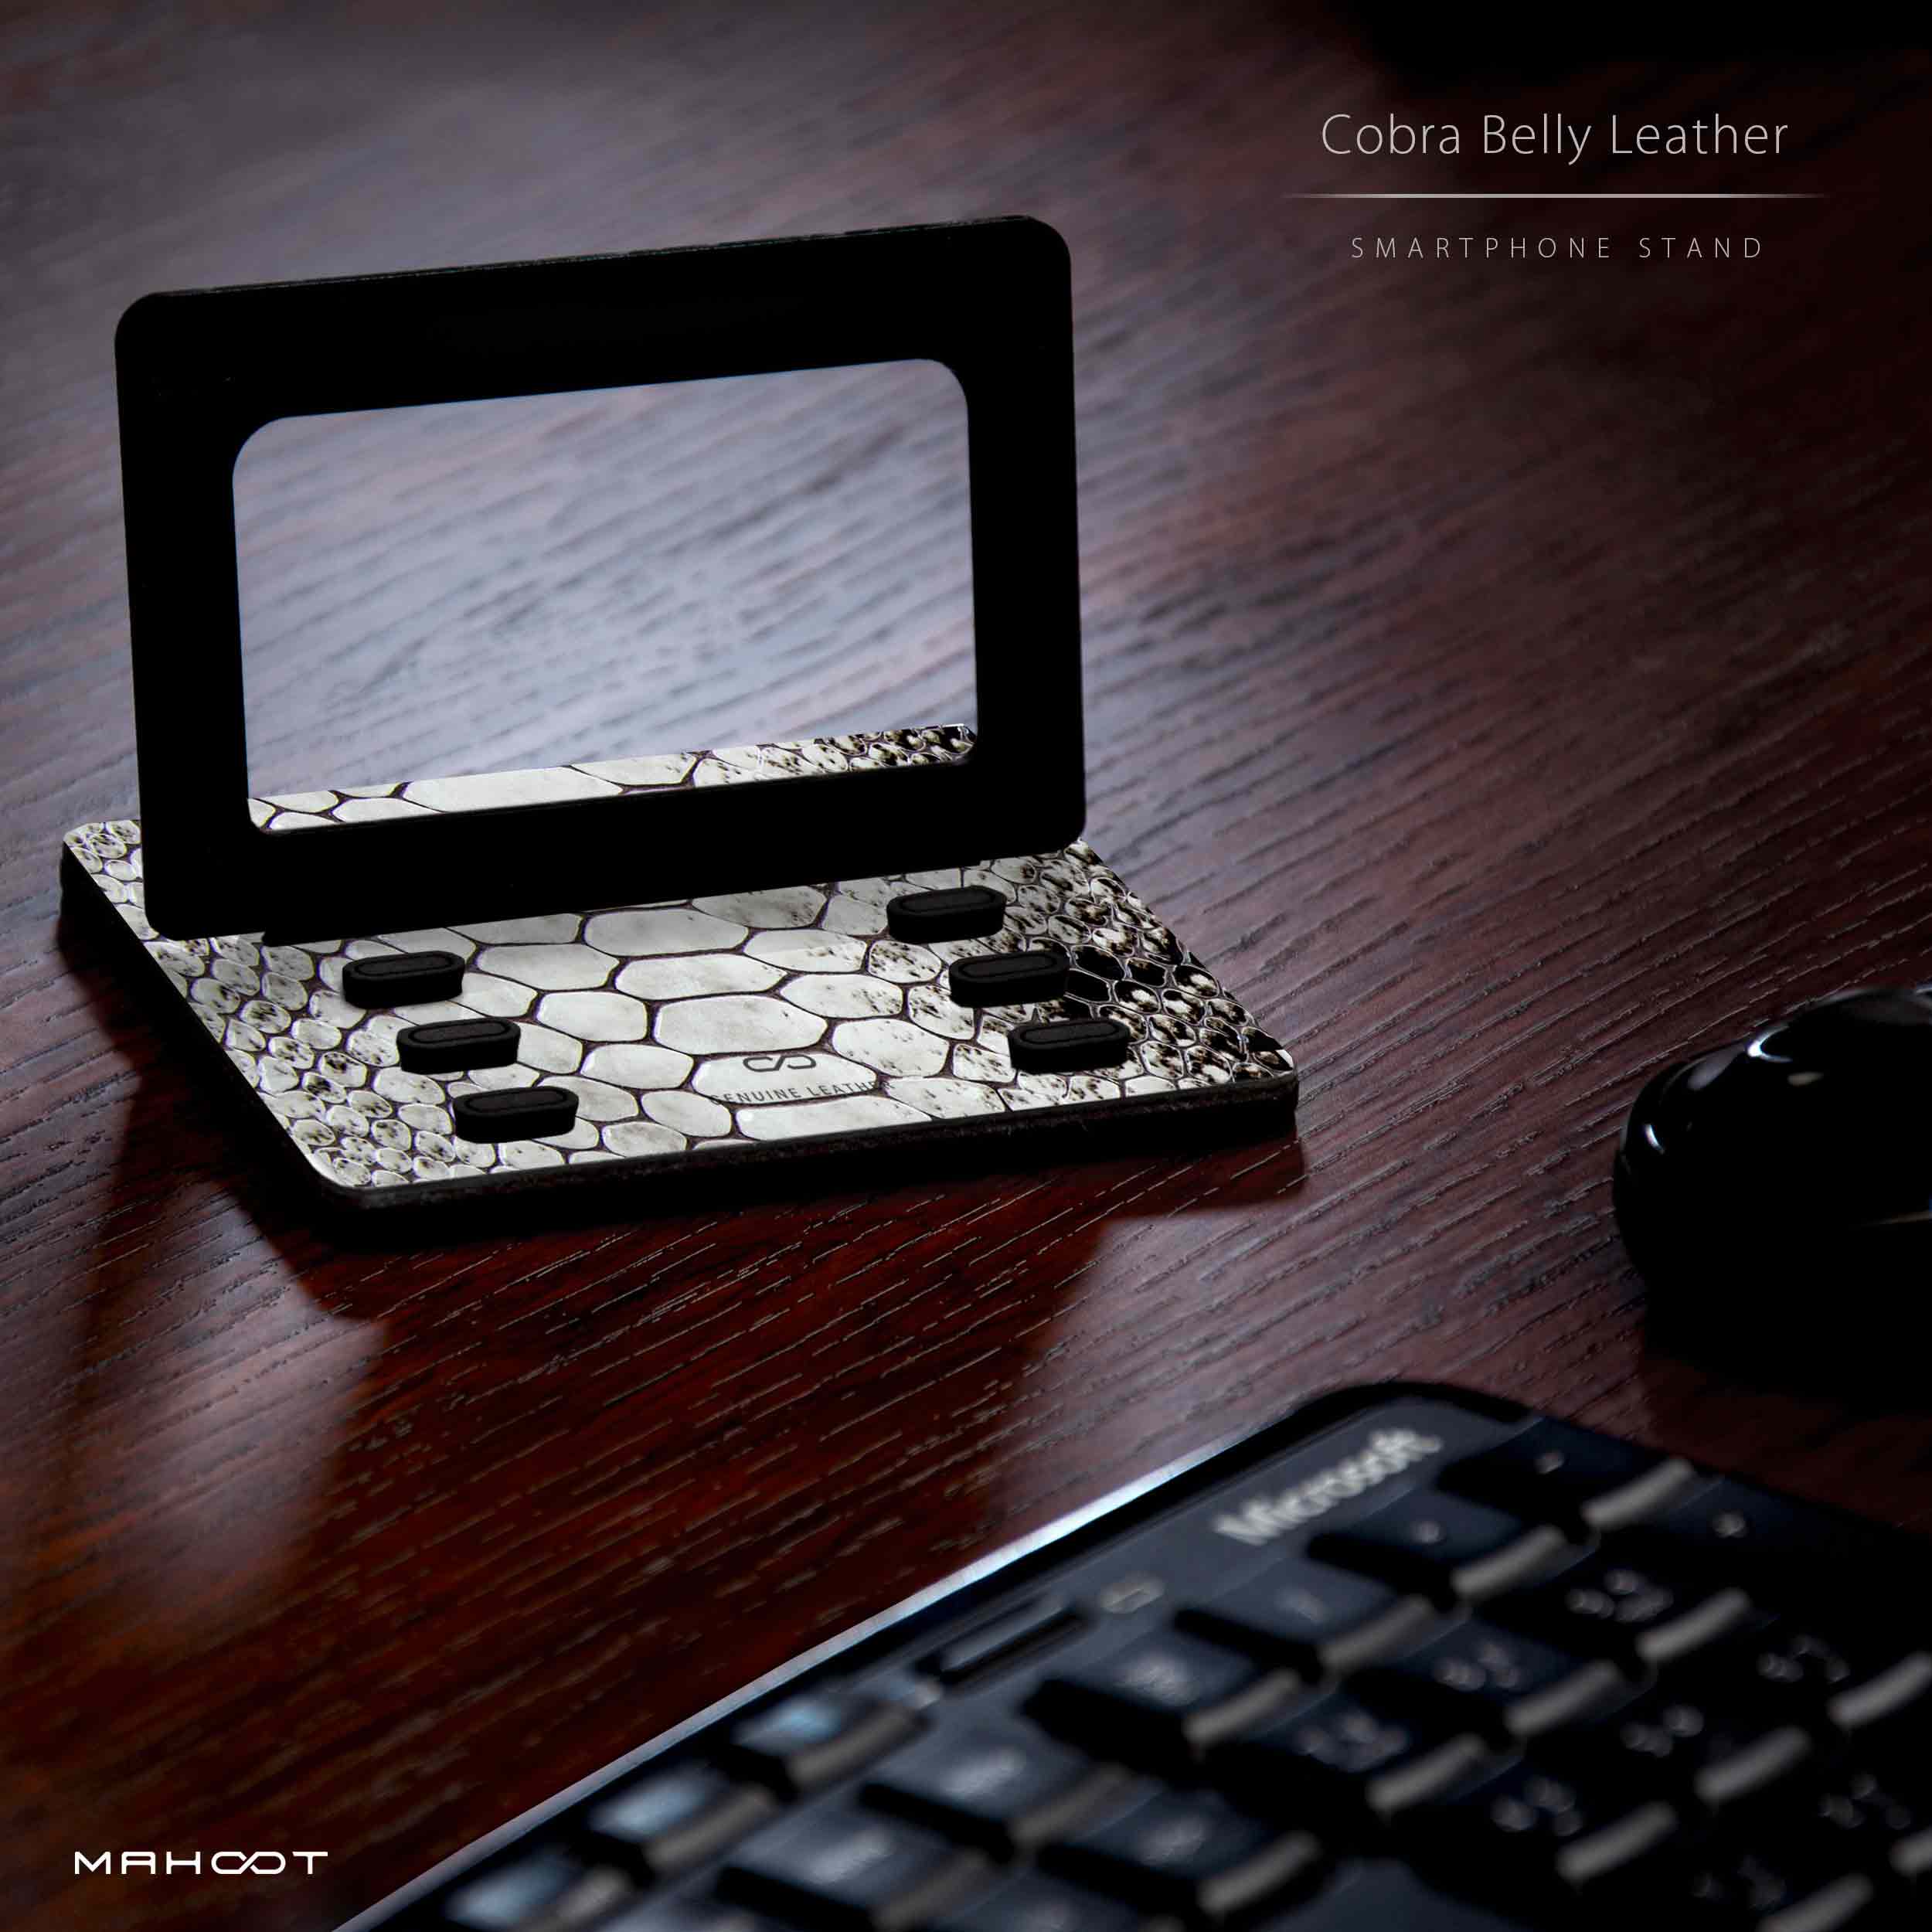 smartphone_stand_cobra_belly_leather_5